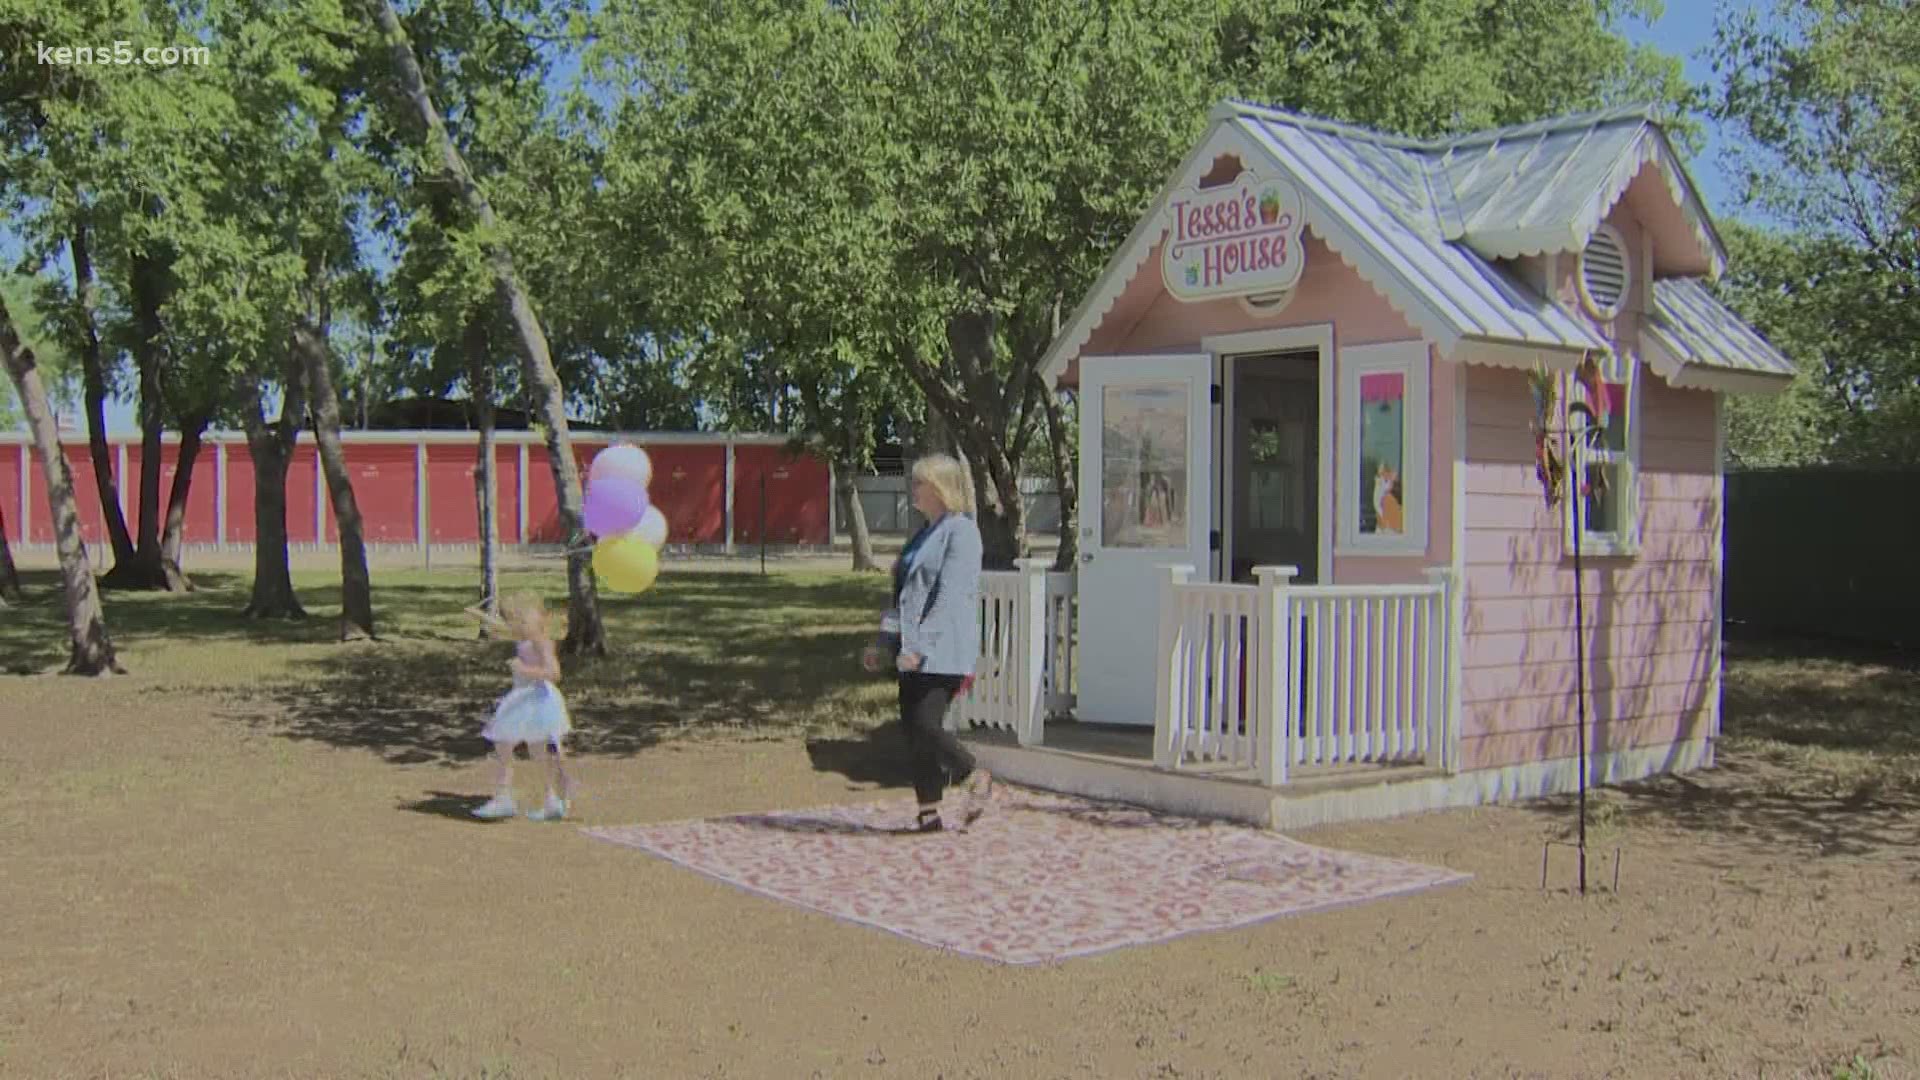 The structure was donated by the 4-year-old great-granddaughter of the RK Group catering company.